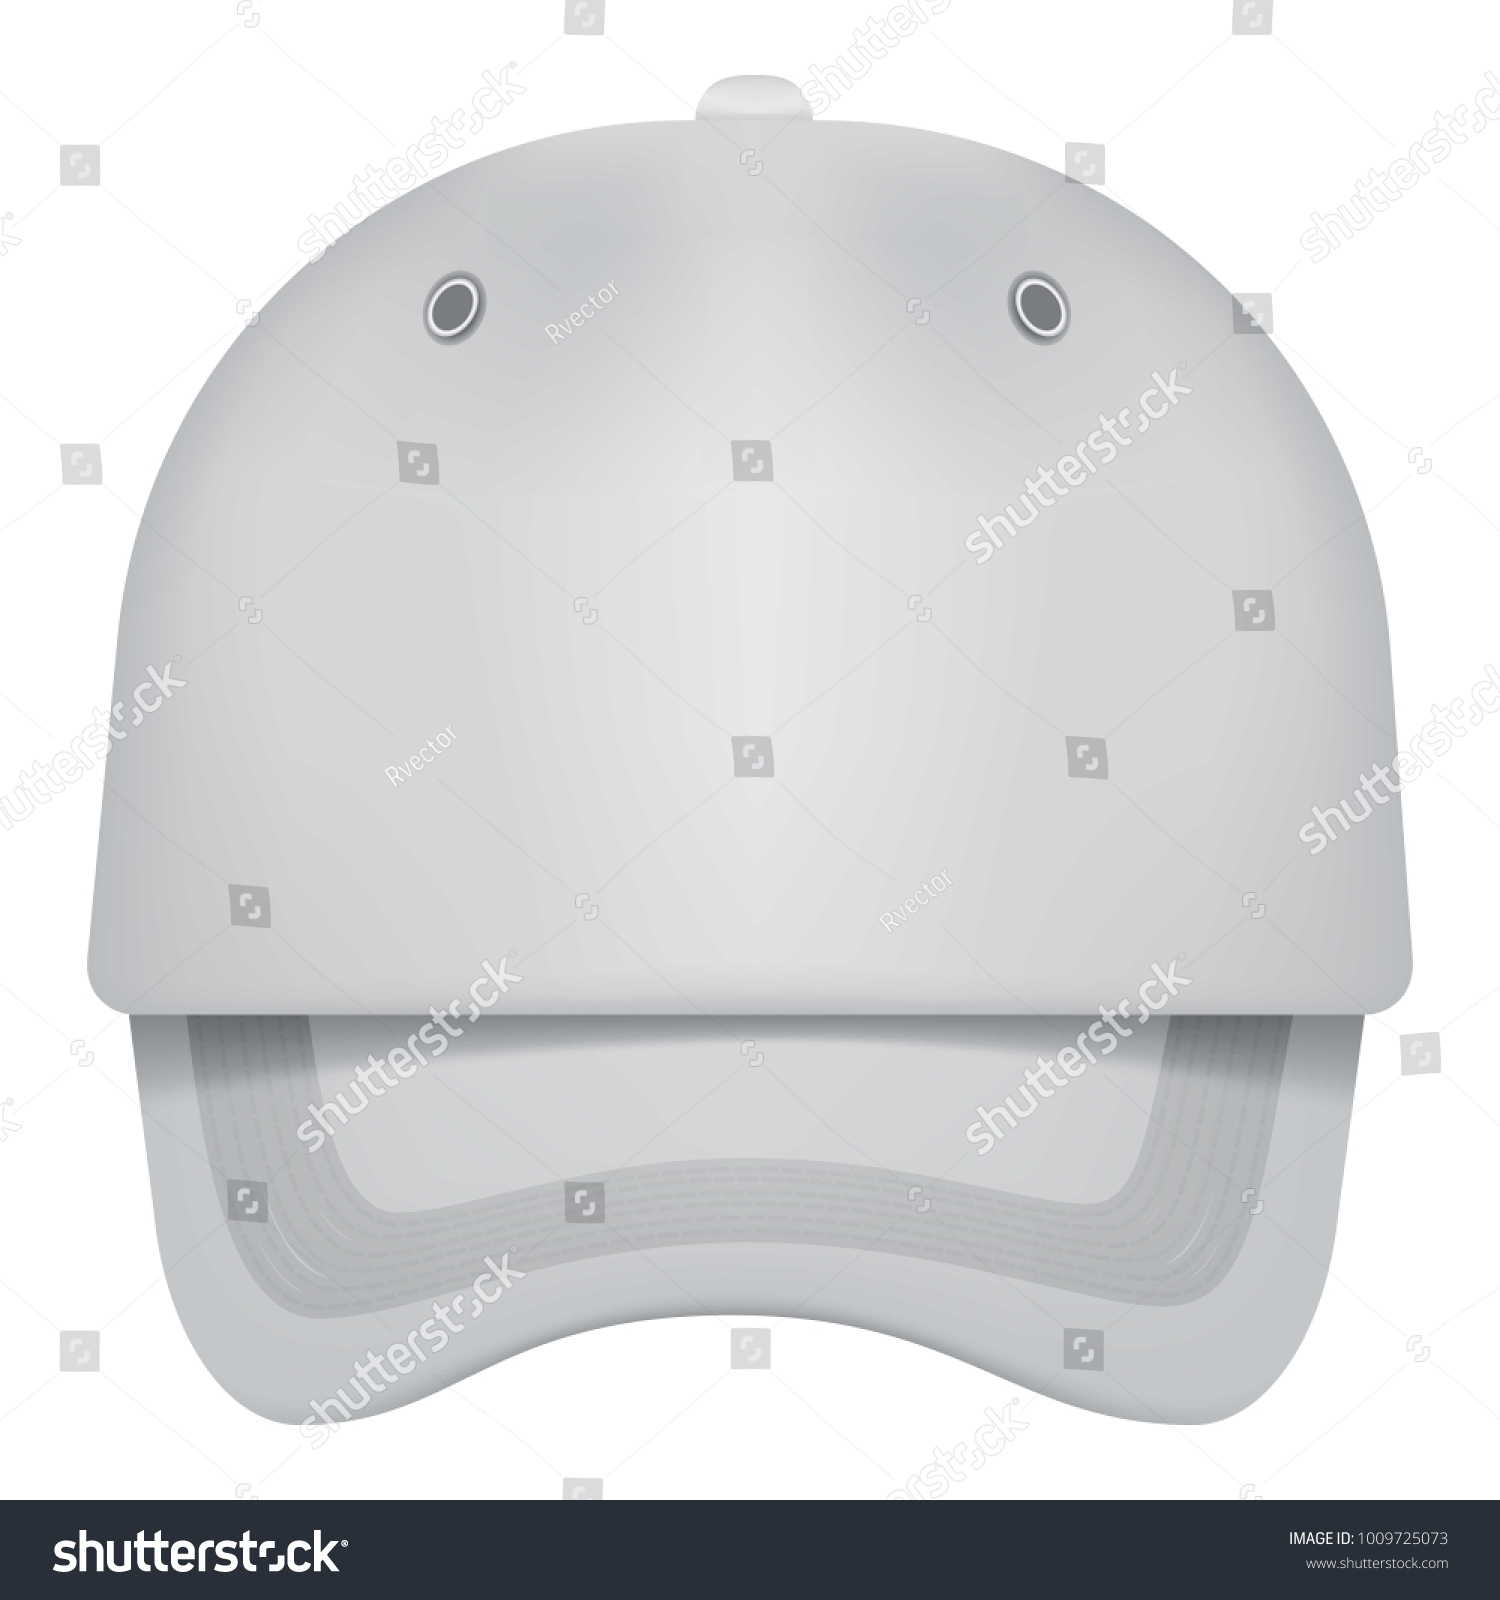 Download 46+ Ski Helmet Mockup Front View Pics Yellowimages - Free ...